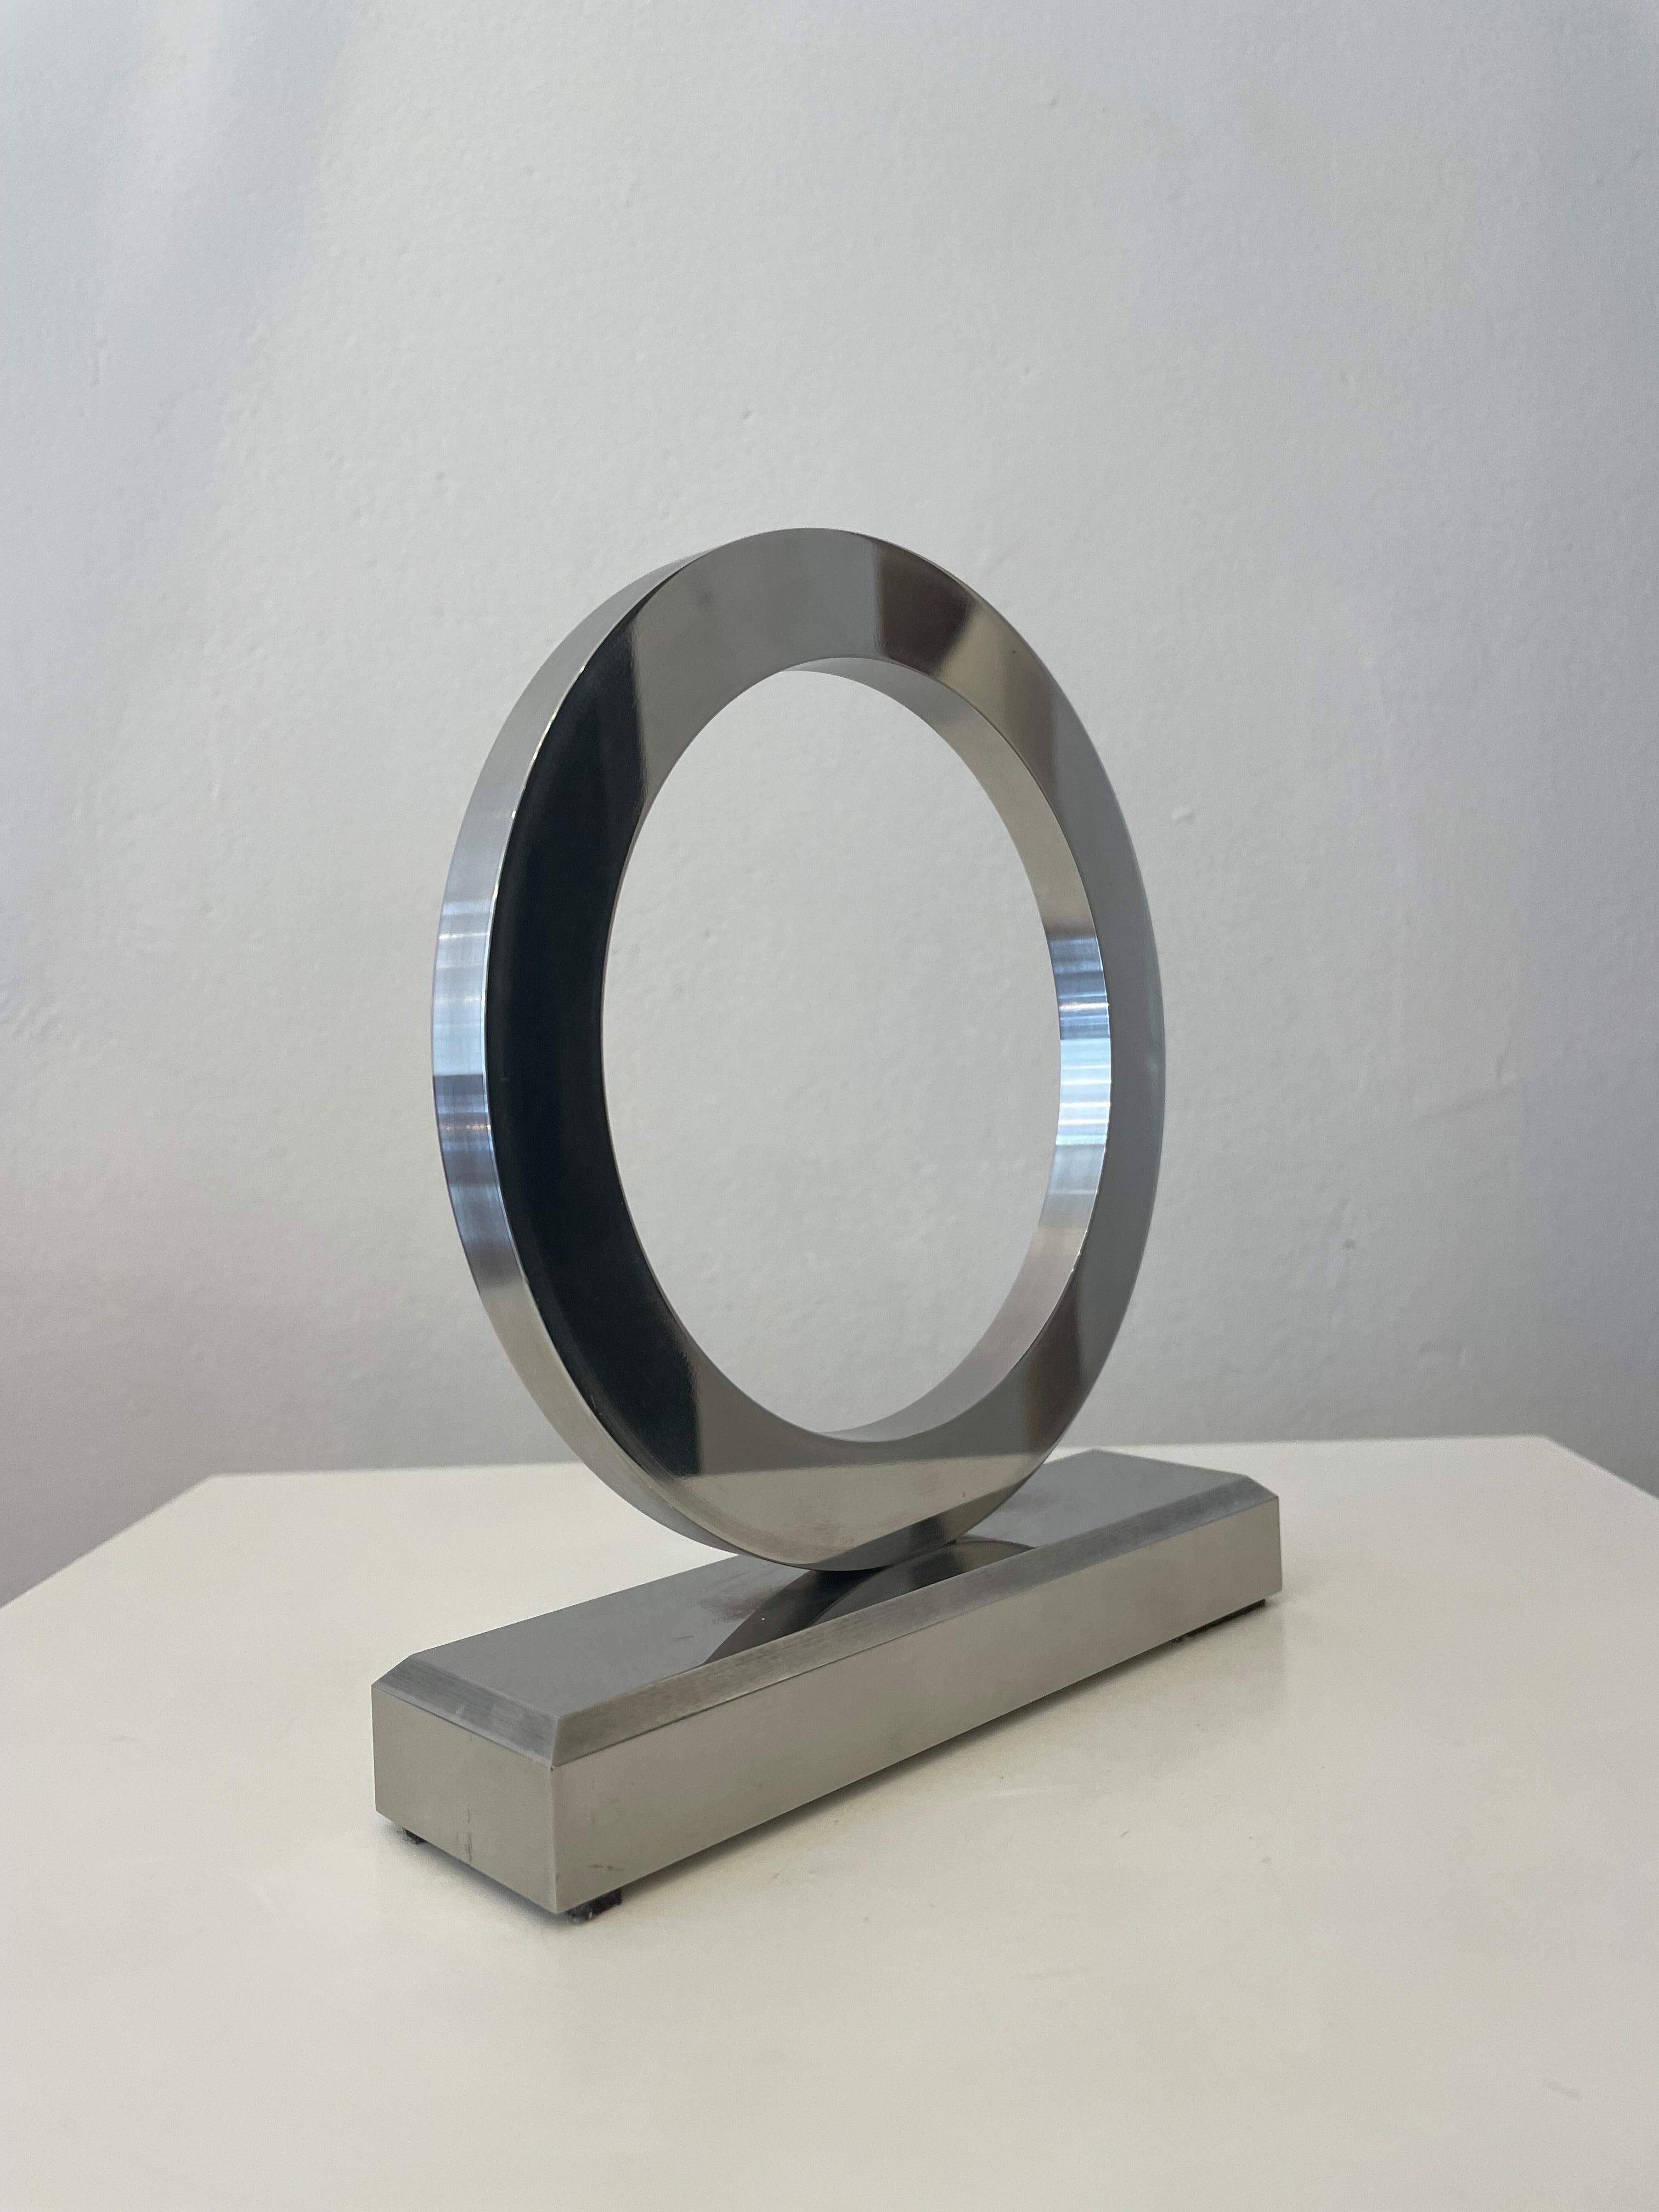 French Mid-Century Modern Signed Steel Sculpture by Emile Gilioli, France, 1960s